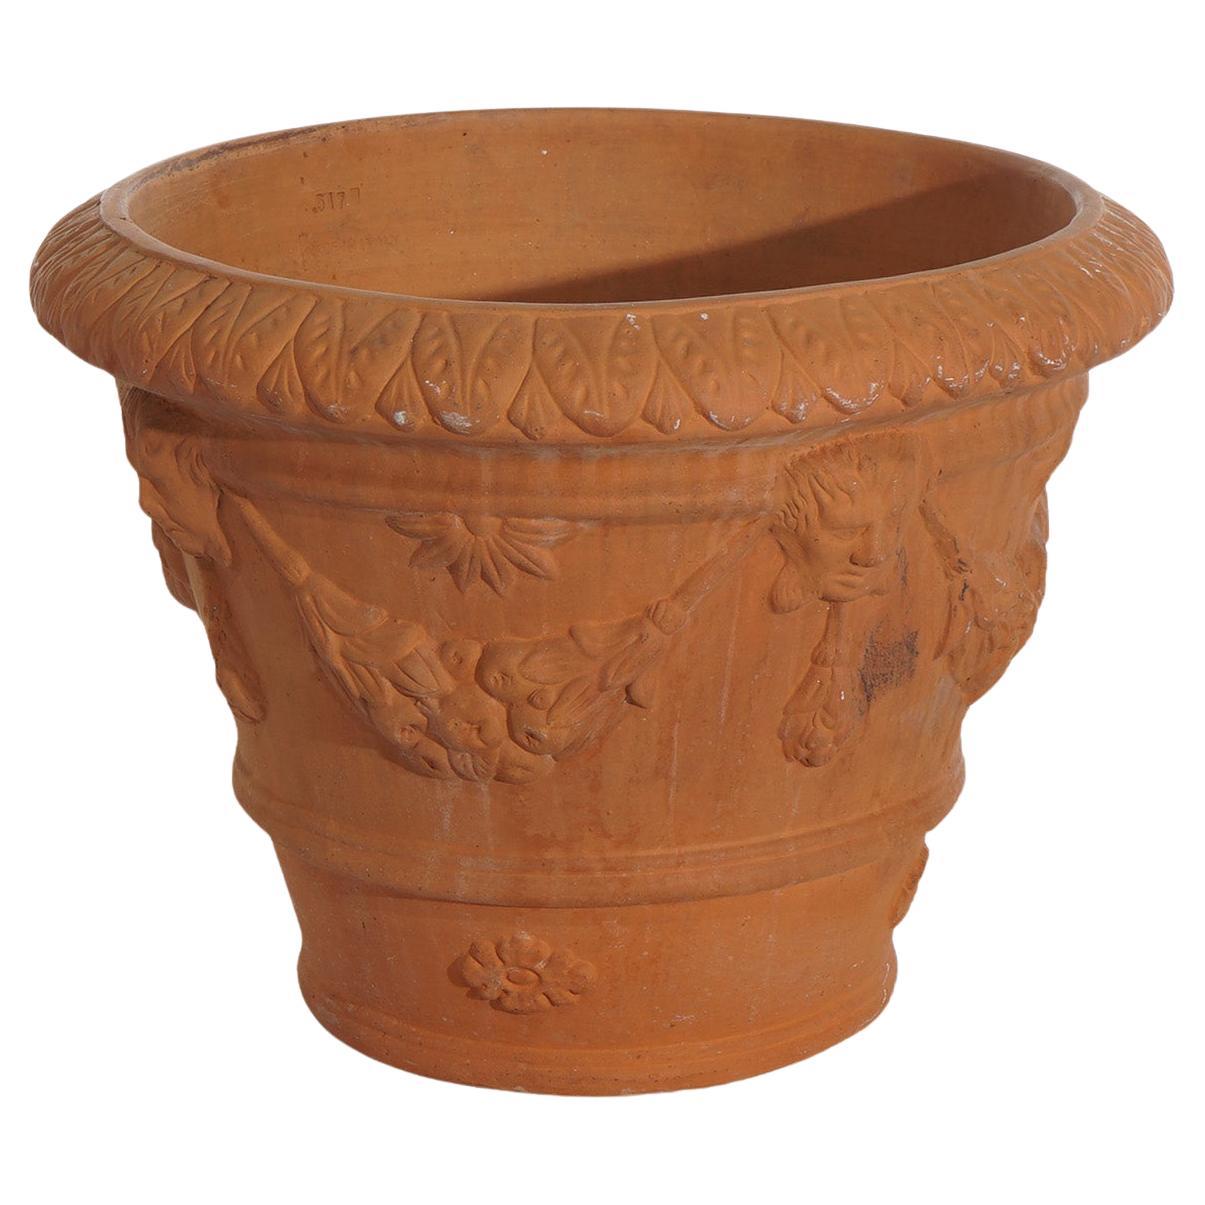 Classical Terracotta Pottery Jardiniere with Figural Masks & Fruit Swag 20th C For Sale